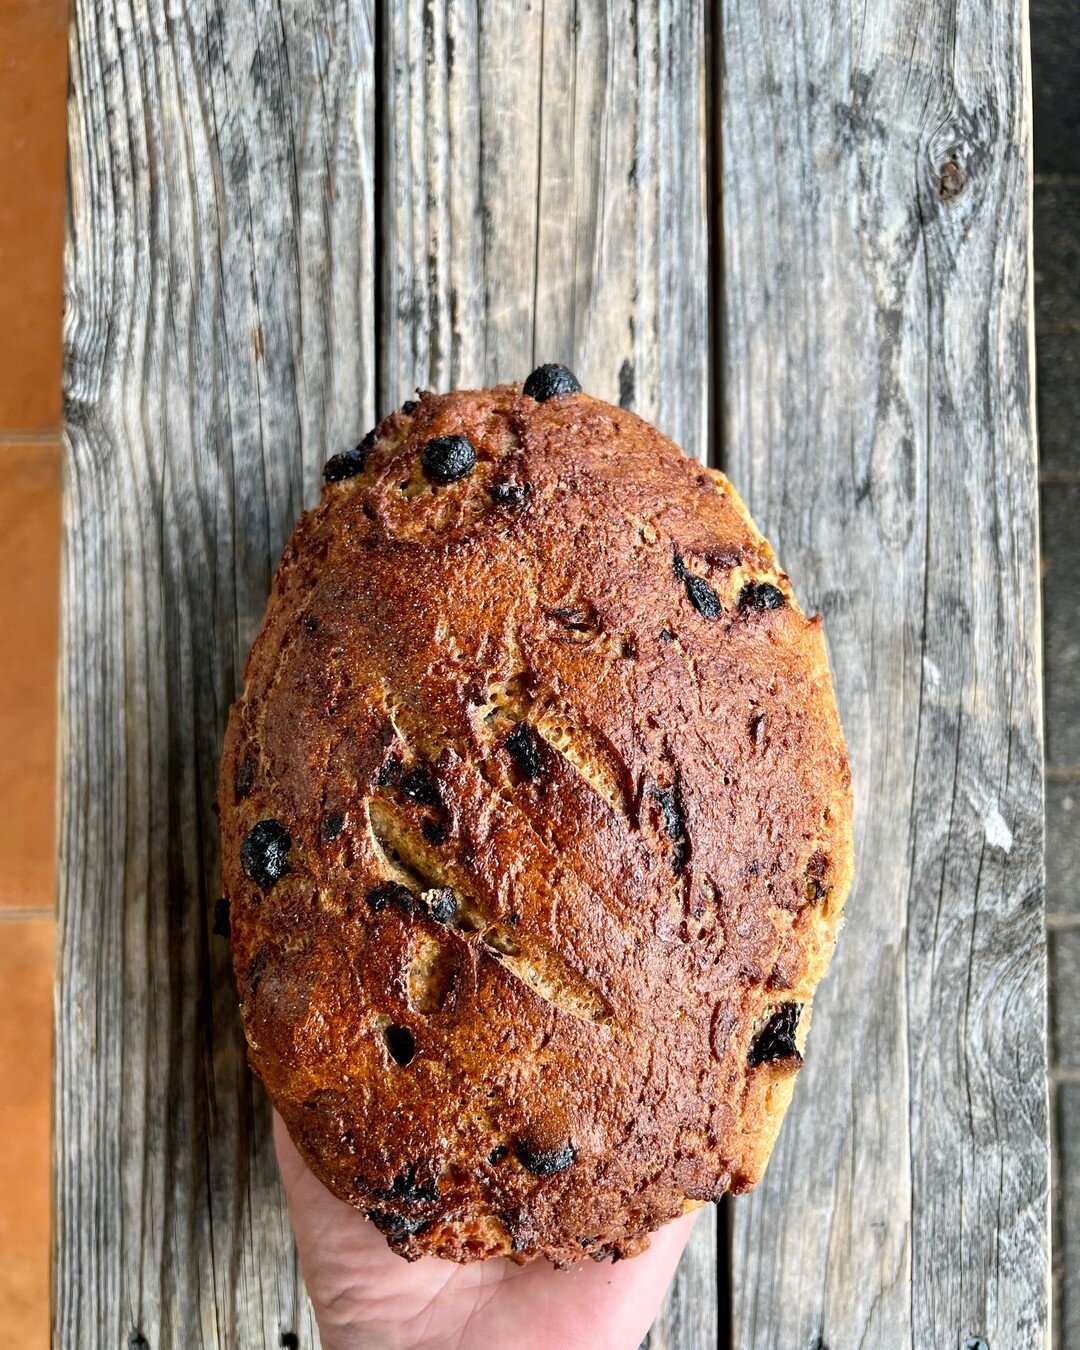 TODAY ONLY!!​​​​​​​​
​​​​​​​​
Gluten free fruit loaf! What a treat! 😍​​​​​​​​
​​​​​​​​
​​​​​​​​
​​​​​​​​
​​​​​​​​
#glutenfree #fruitloaf #betterbread #bredco #bredbread #albany #sustainable #artisanbread #lovacore #sourdough #realbread #flourwatersa